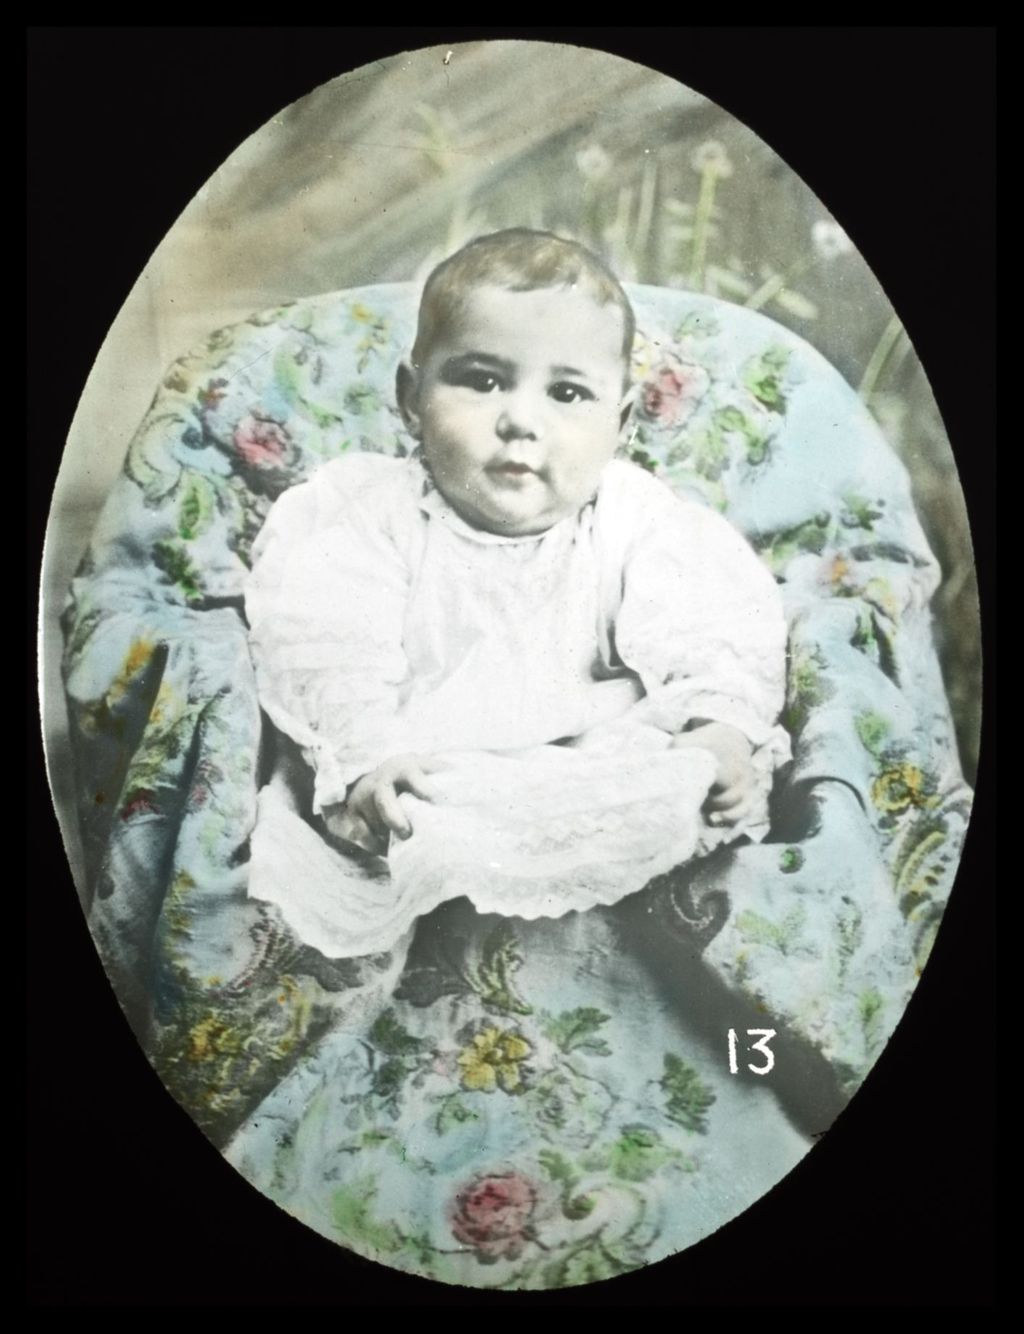 Miniature of An unidentified baby